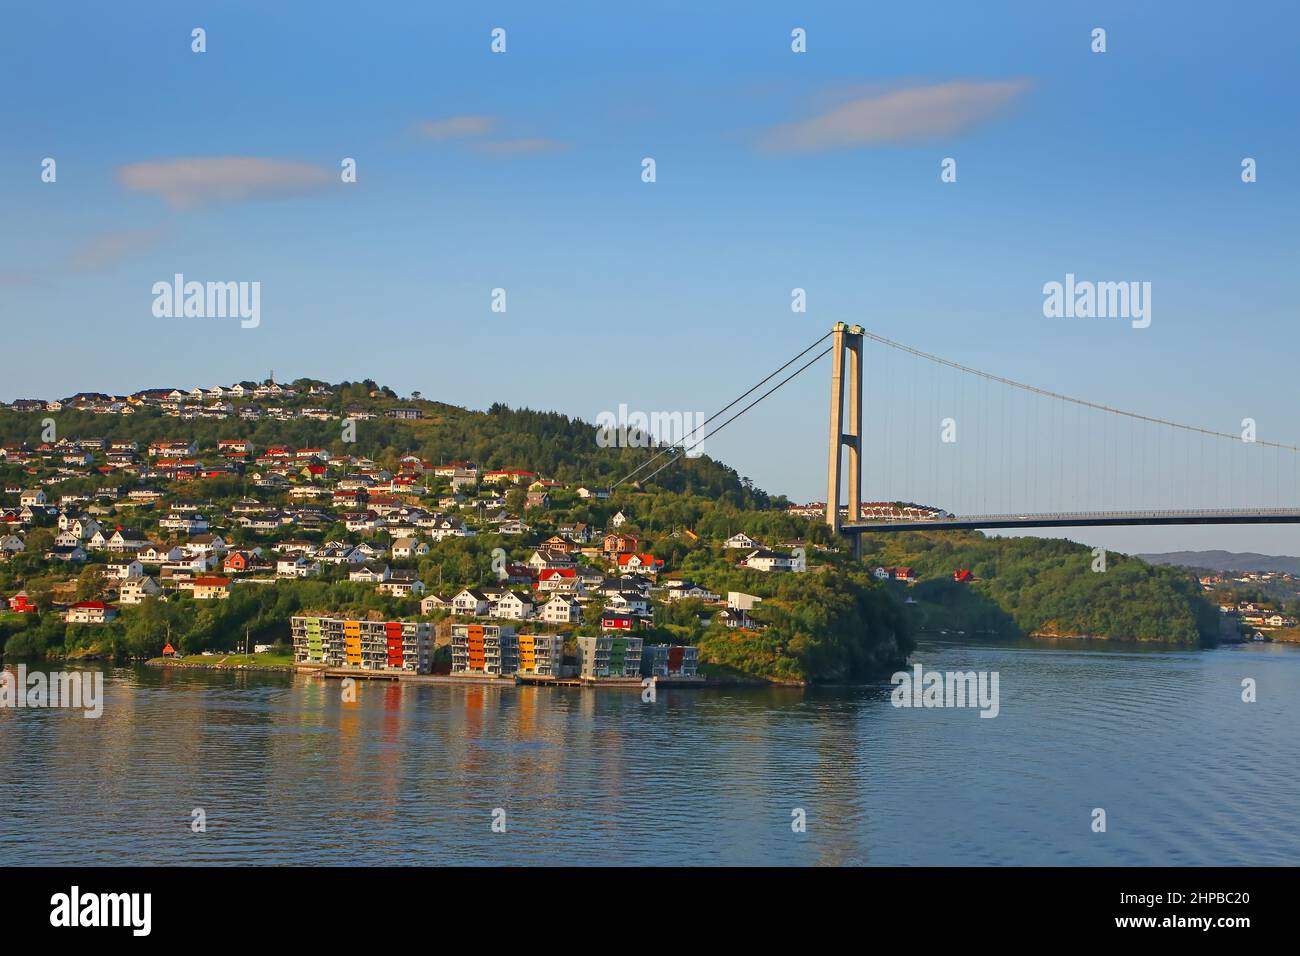 Beautiful view from the port of Bergen of the landscape and the Askøy Bridge which is a suspension bridge, Norway. Stock Photo